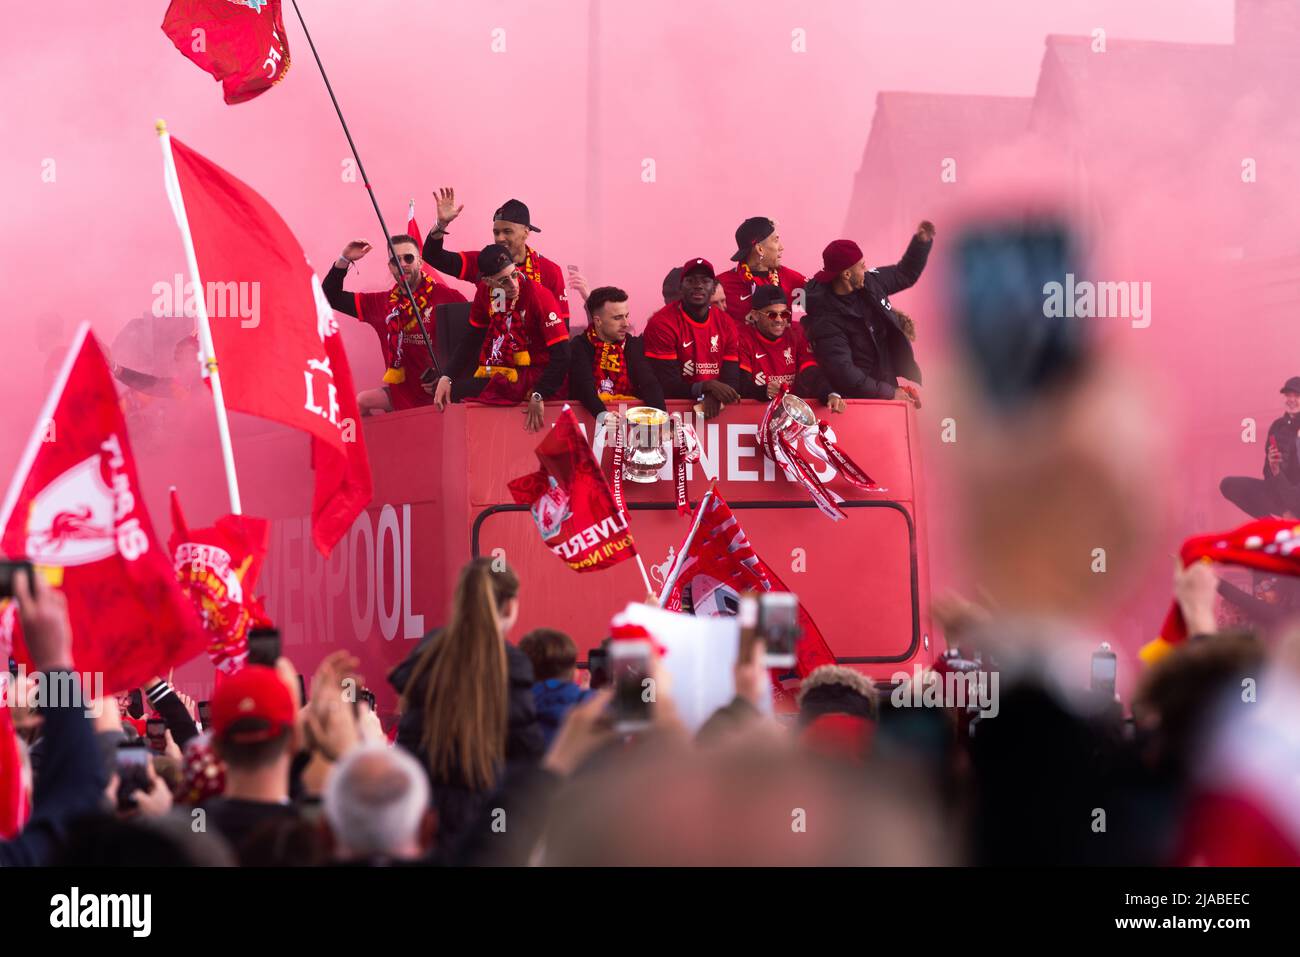 Liverpool, UK. 29th May 2022 - Despite last nights defeat at the Champions League Final, Liverpool Football Club take part in an open top bus parade to showcase the FA Cup and the Carabao Cup silverware won by the team earlier in the year. Credit: Christopher Middleton/Alamy Live News Stock Photo